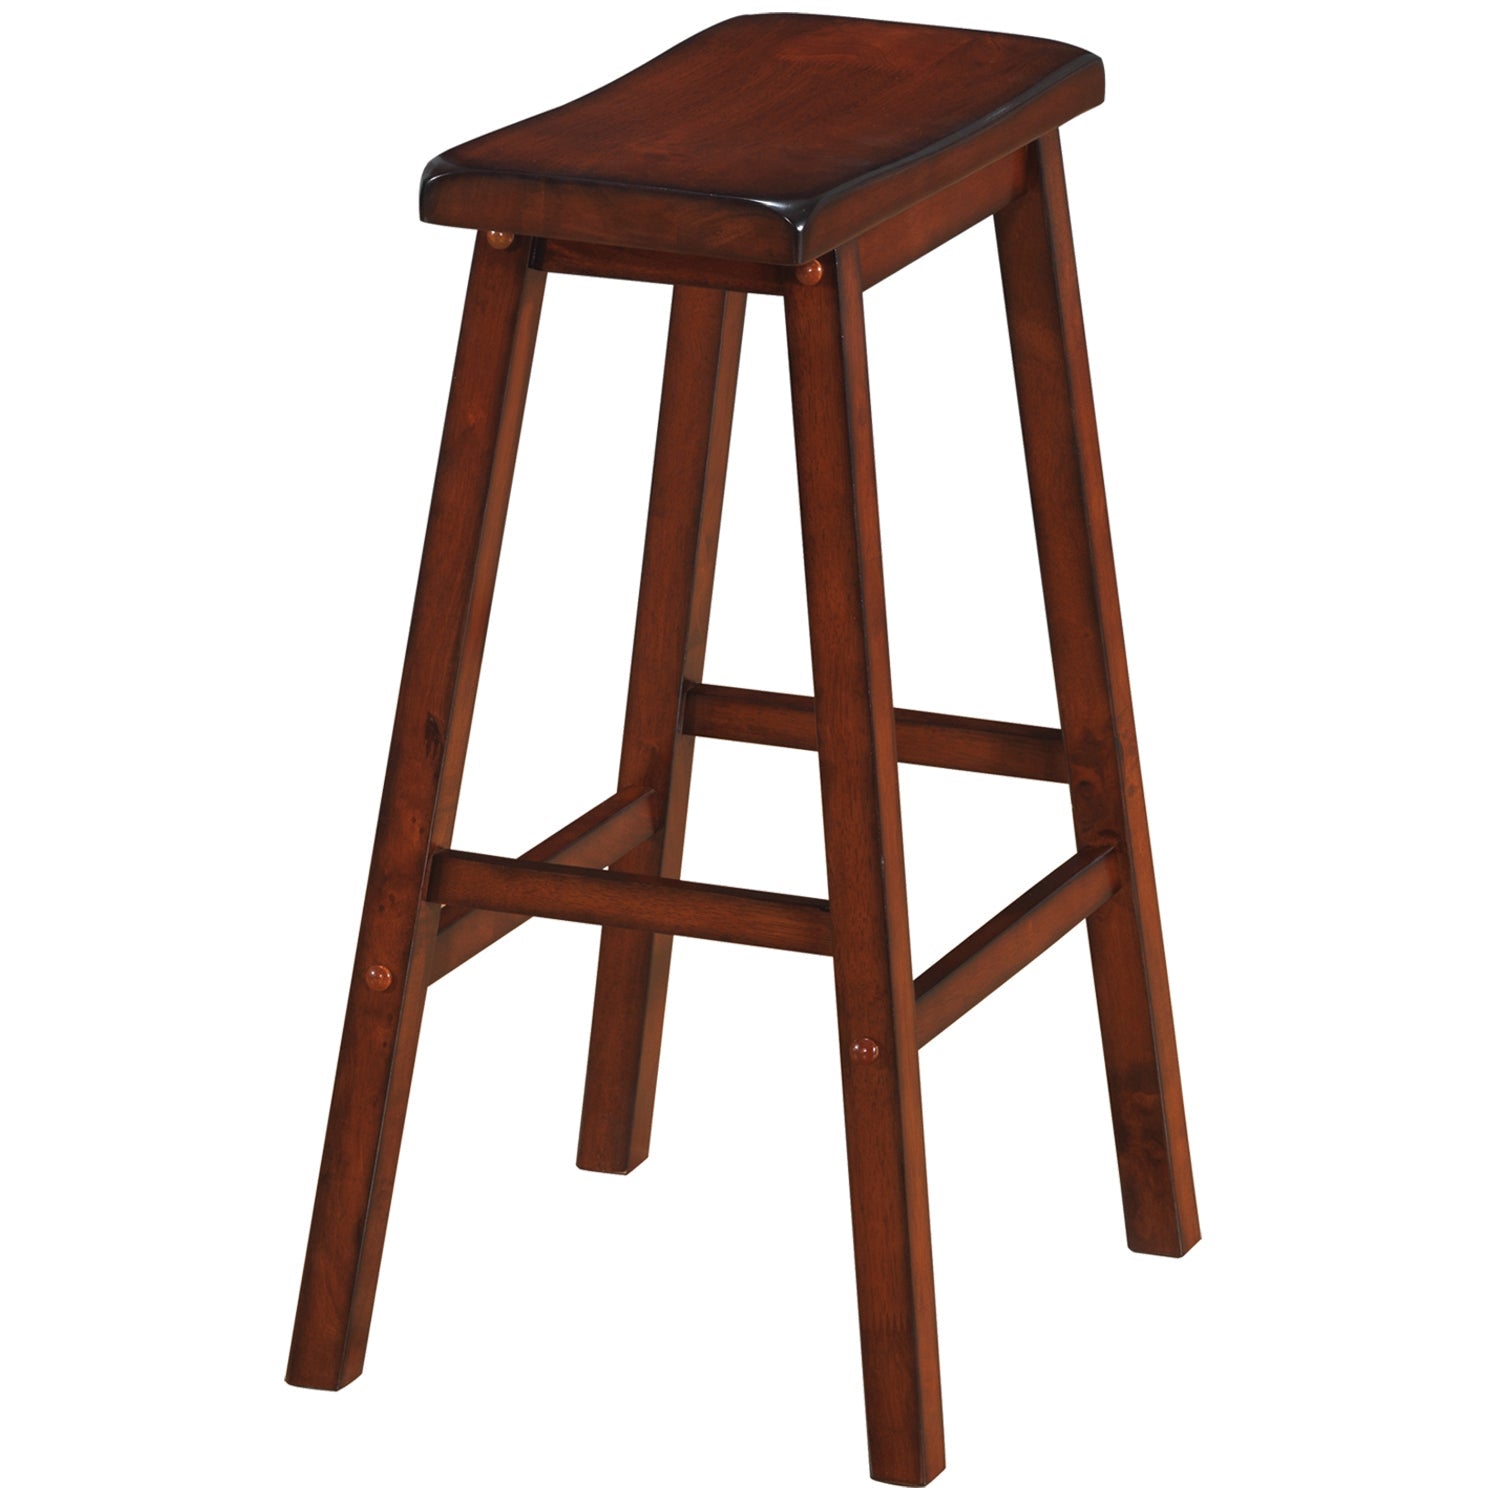 RAM GAME TABLE BACKLESS SADDLE BARSTOOL BSTL3-Game Table Genie